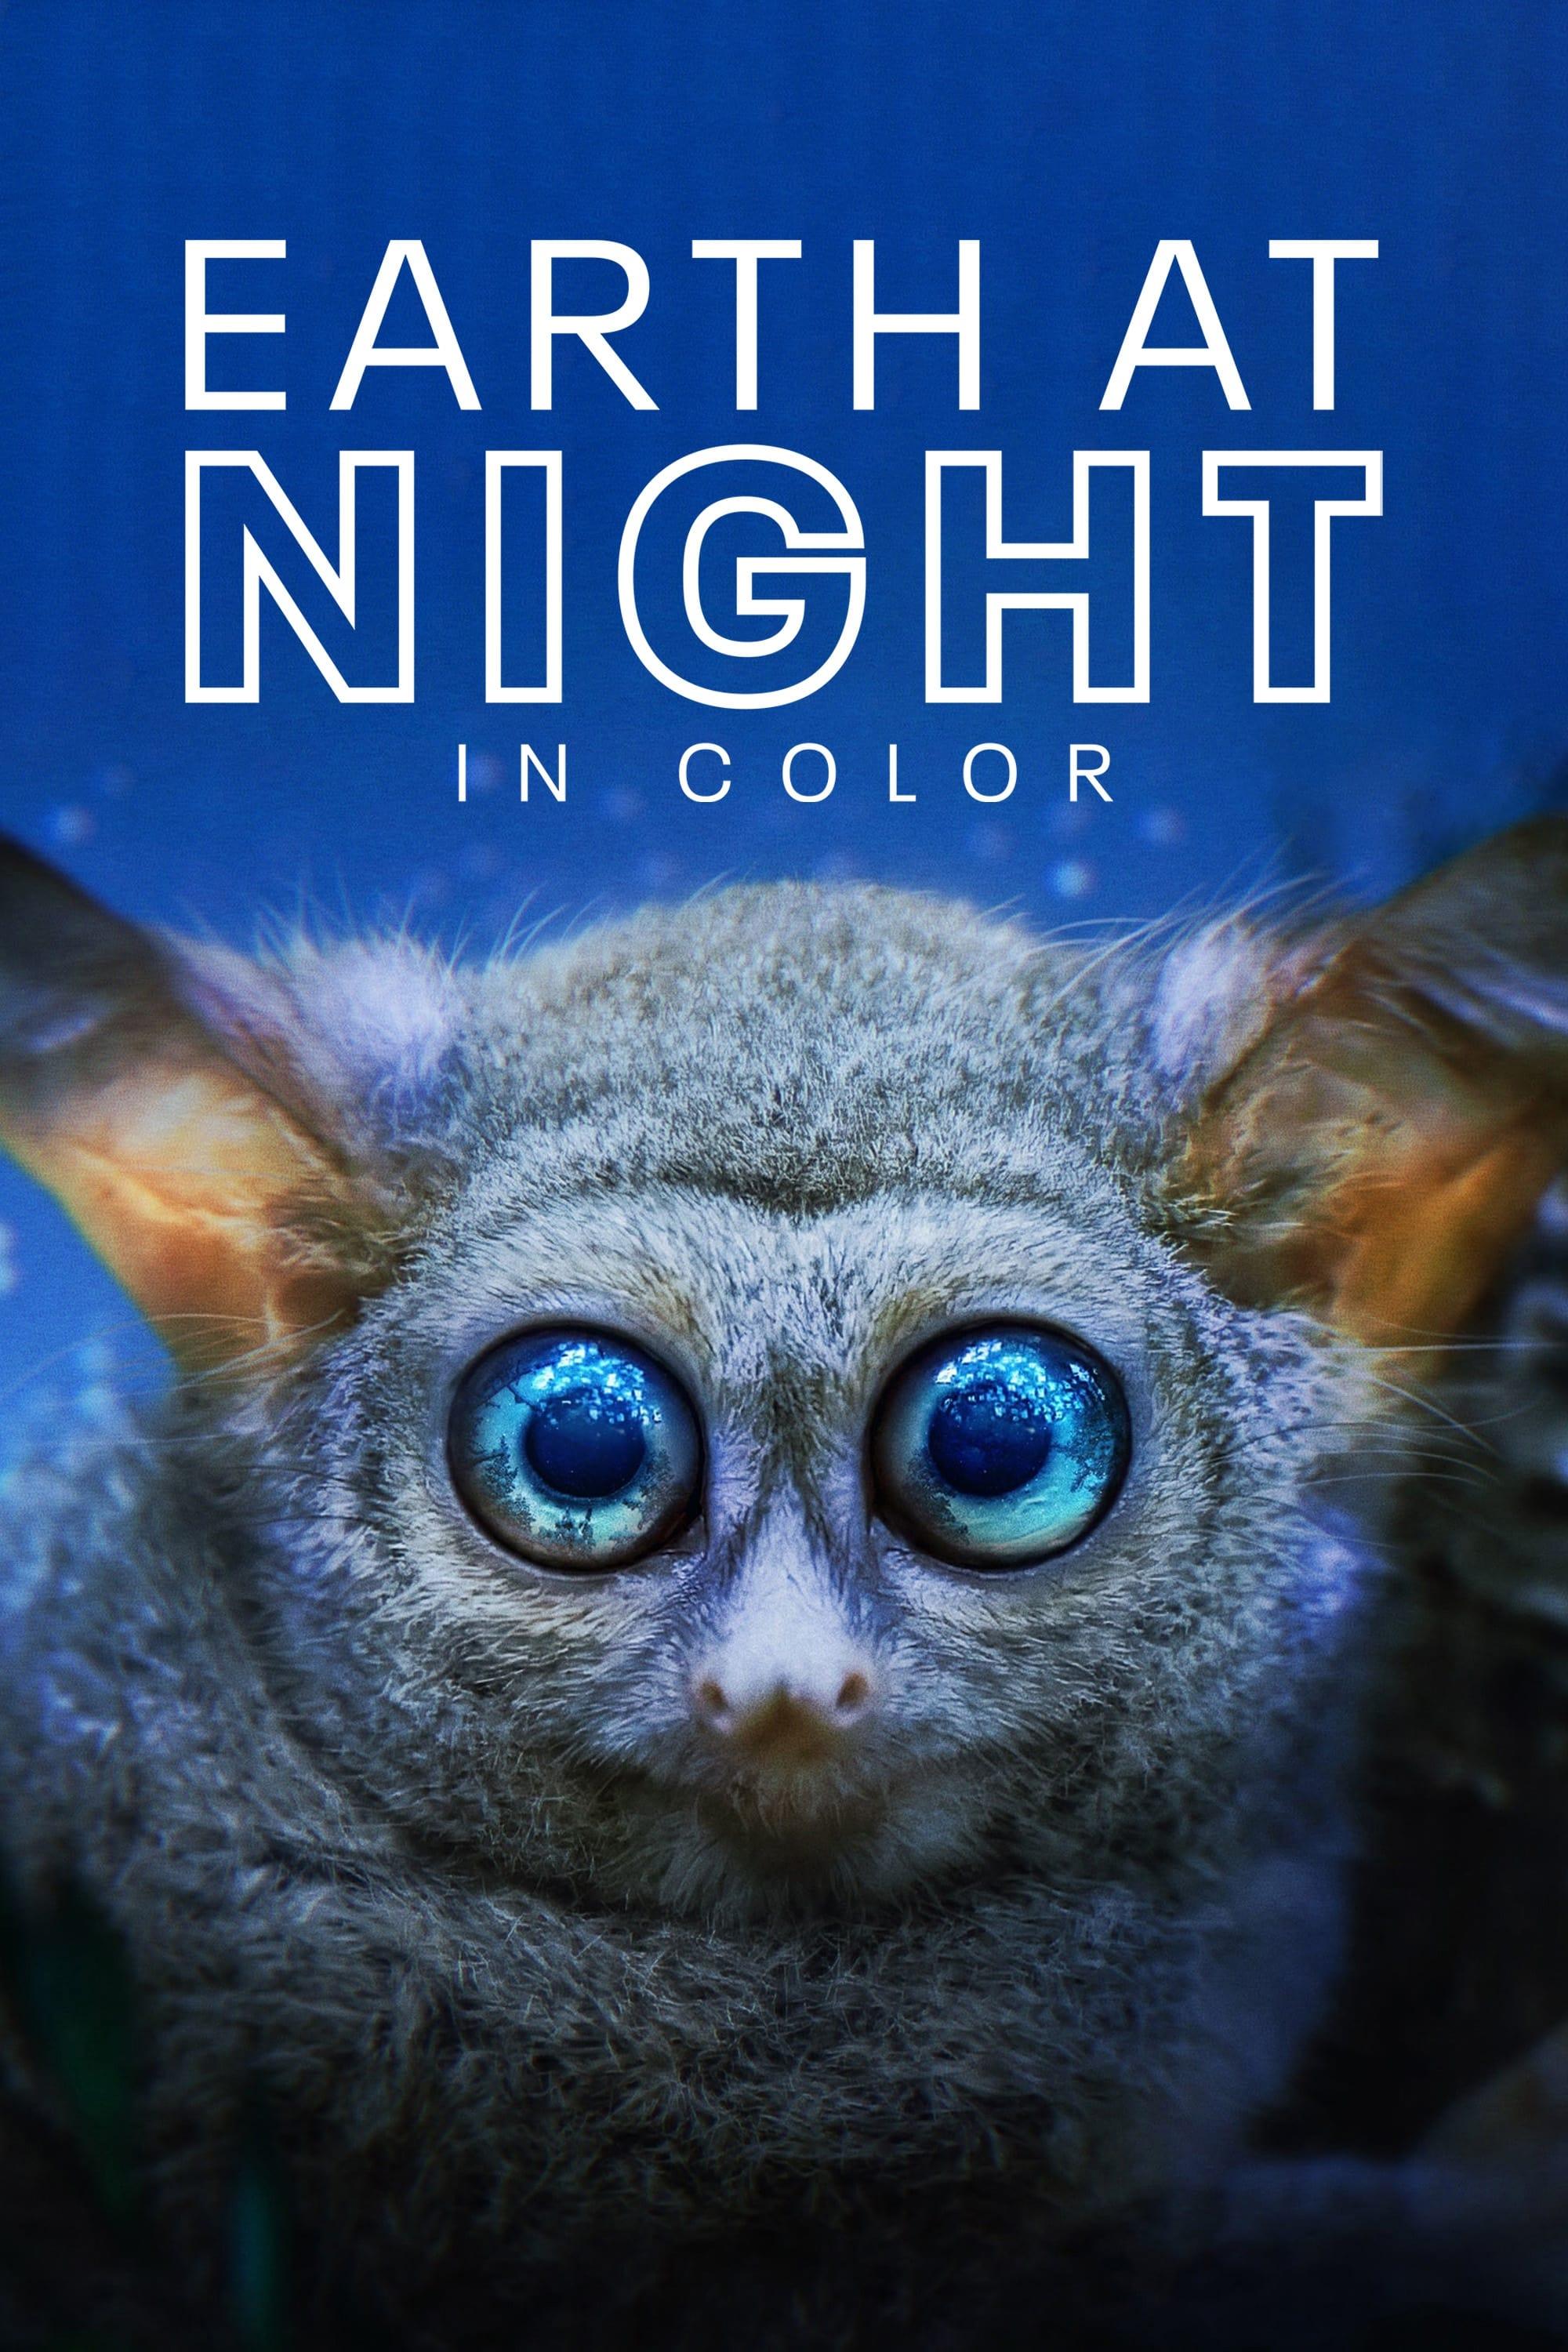 Earth at Night in Color poster